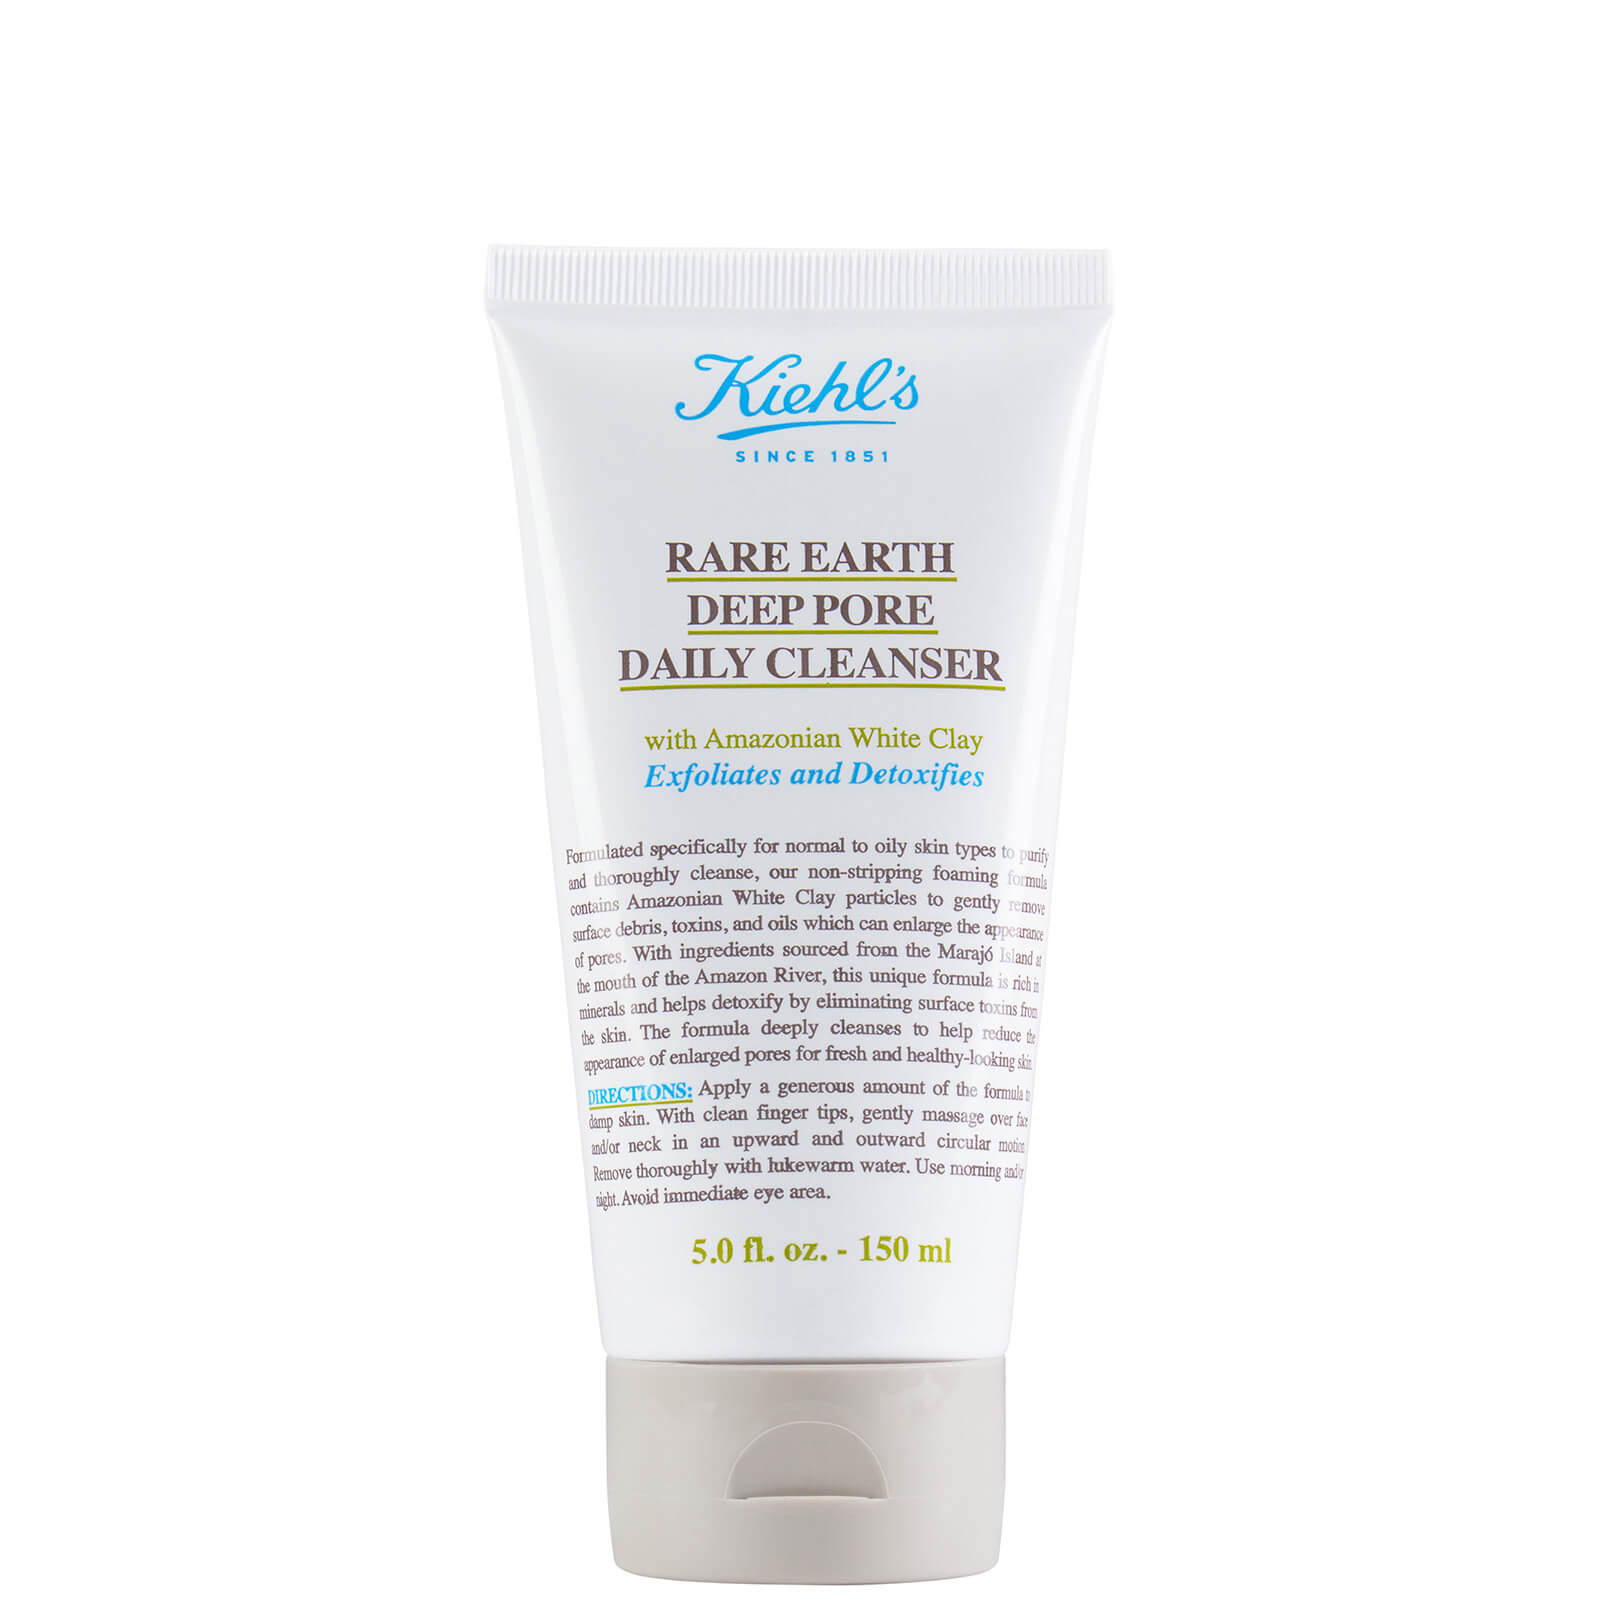 Photos - Facial / Body Cleansing Product Kiehls Kiehl's Rare Earth Deep Pore Daily Cleanser  - 150ml (Various Sizes)